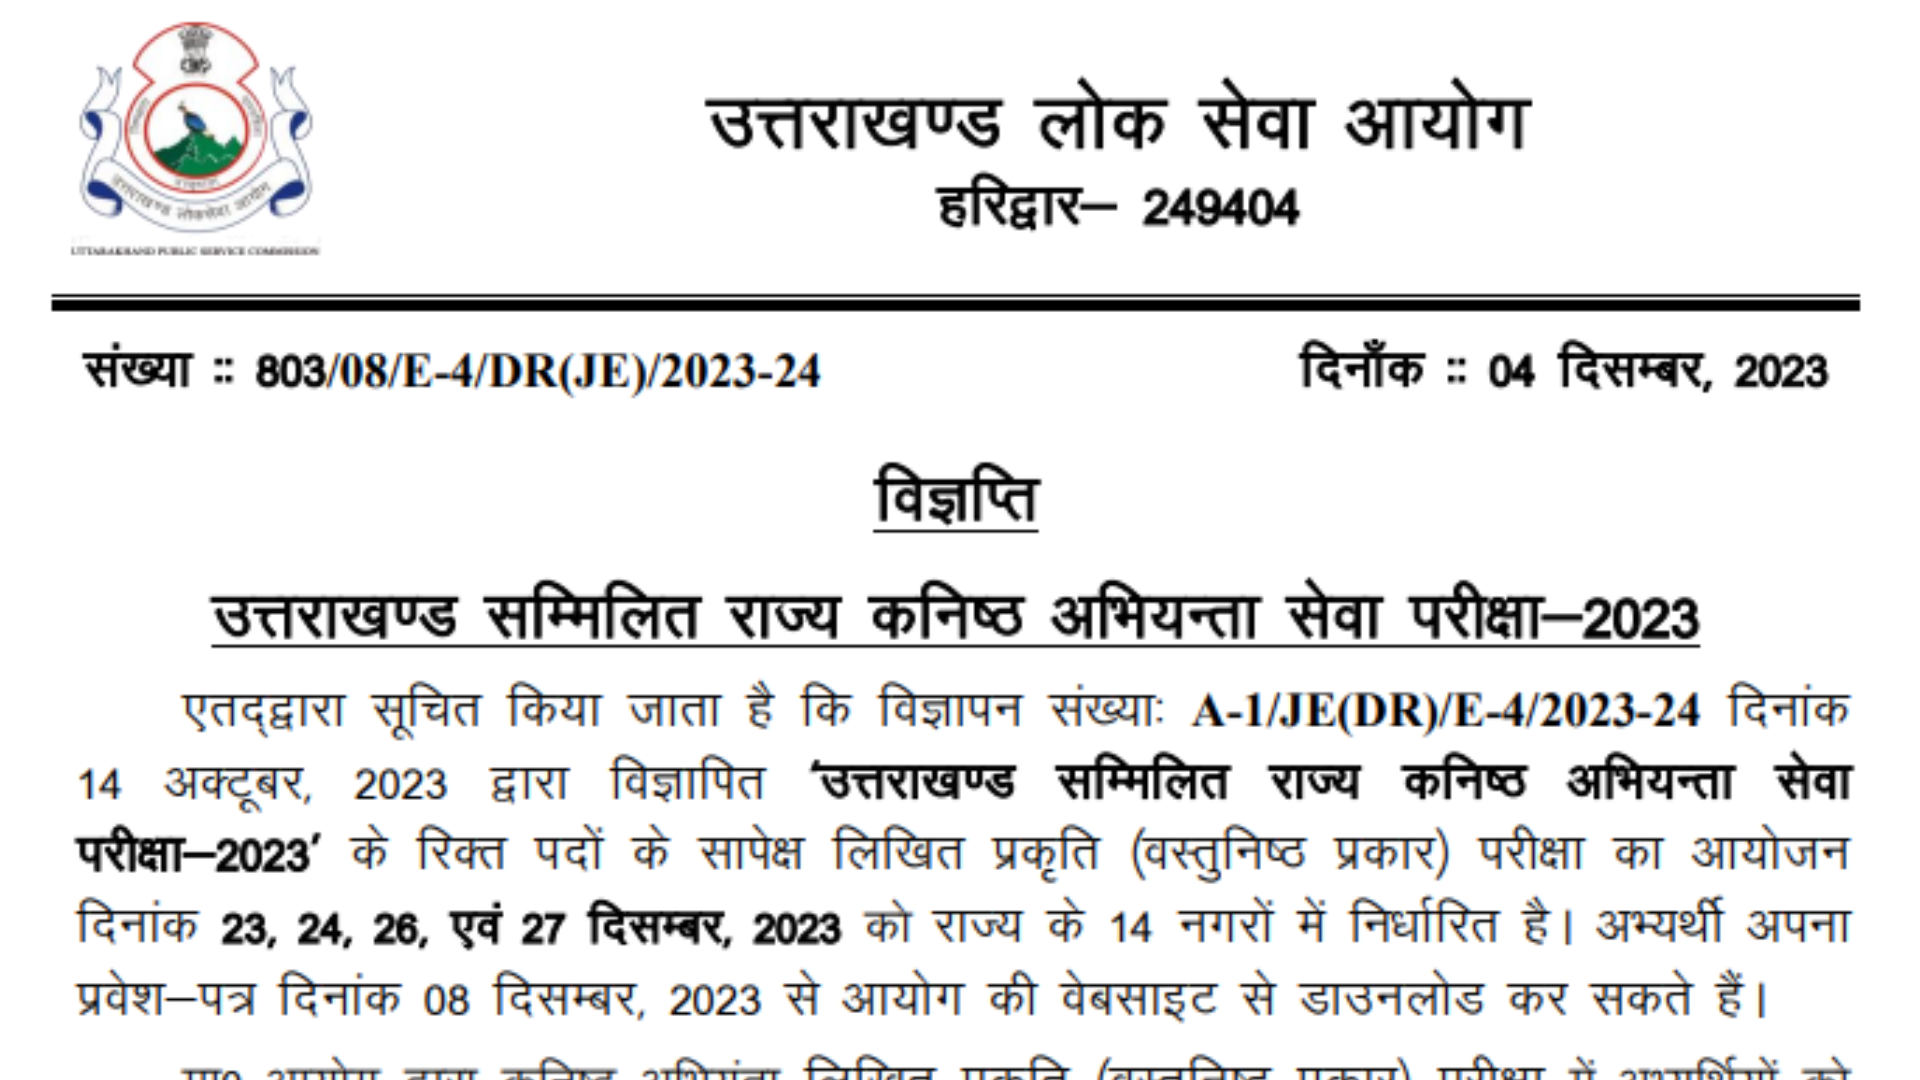 UKPSC JE Admit Card 2023 Direct Link Given Here, Download Now